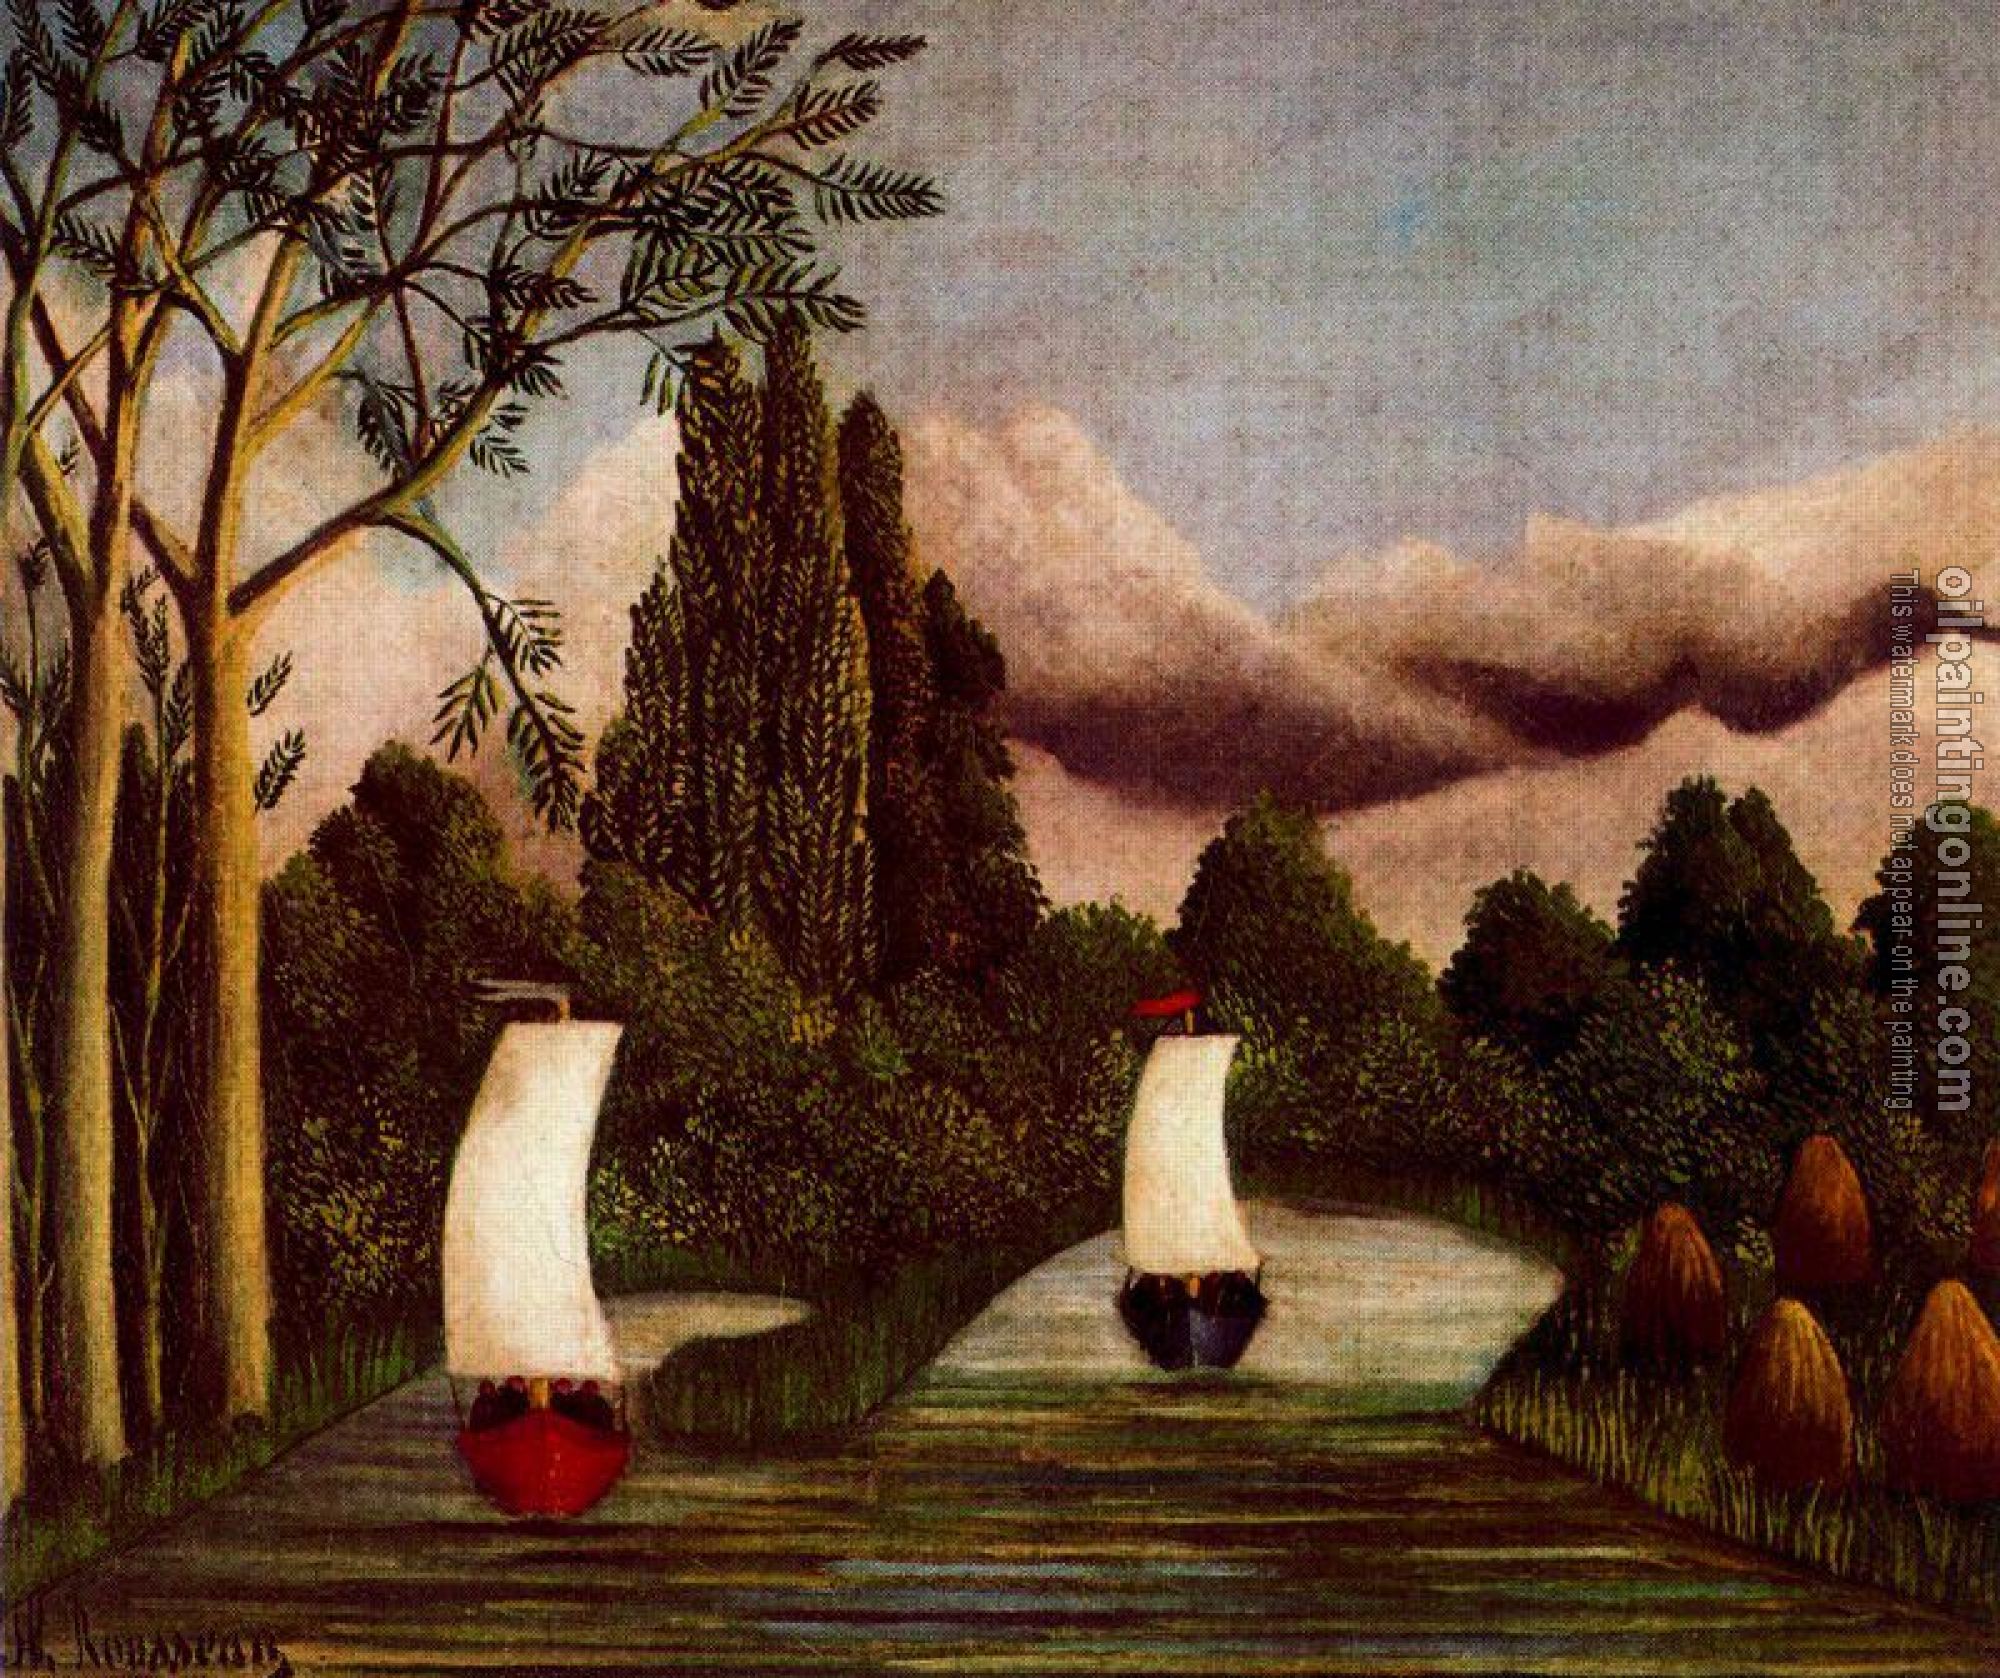 Henri Rousseau - The Banks of the Oise